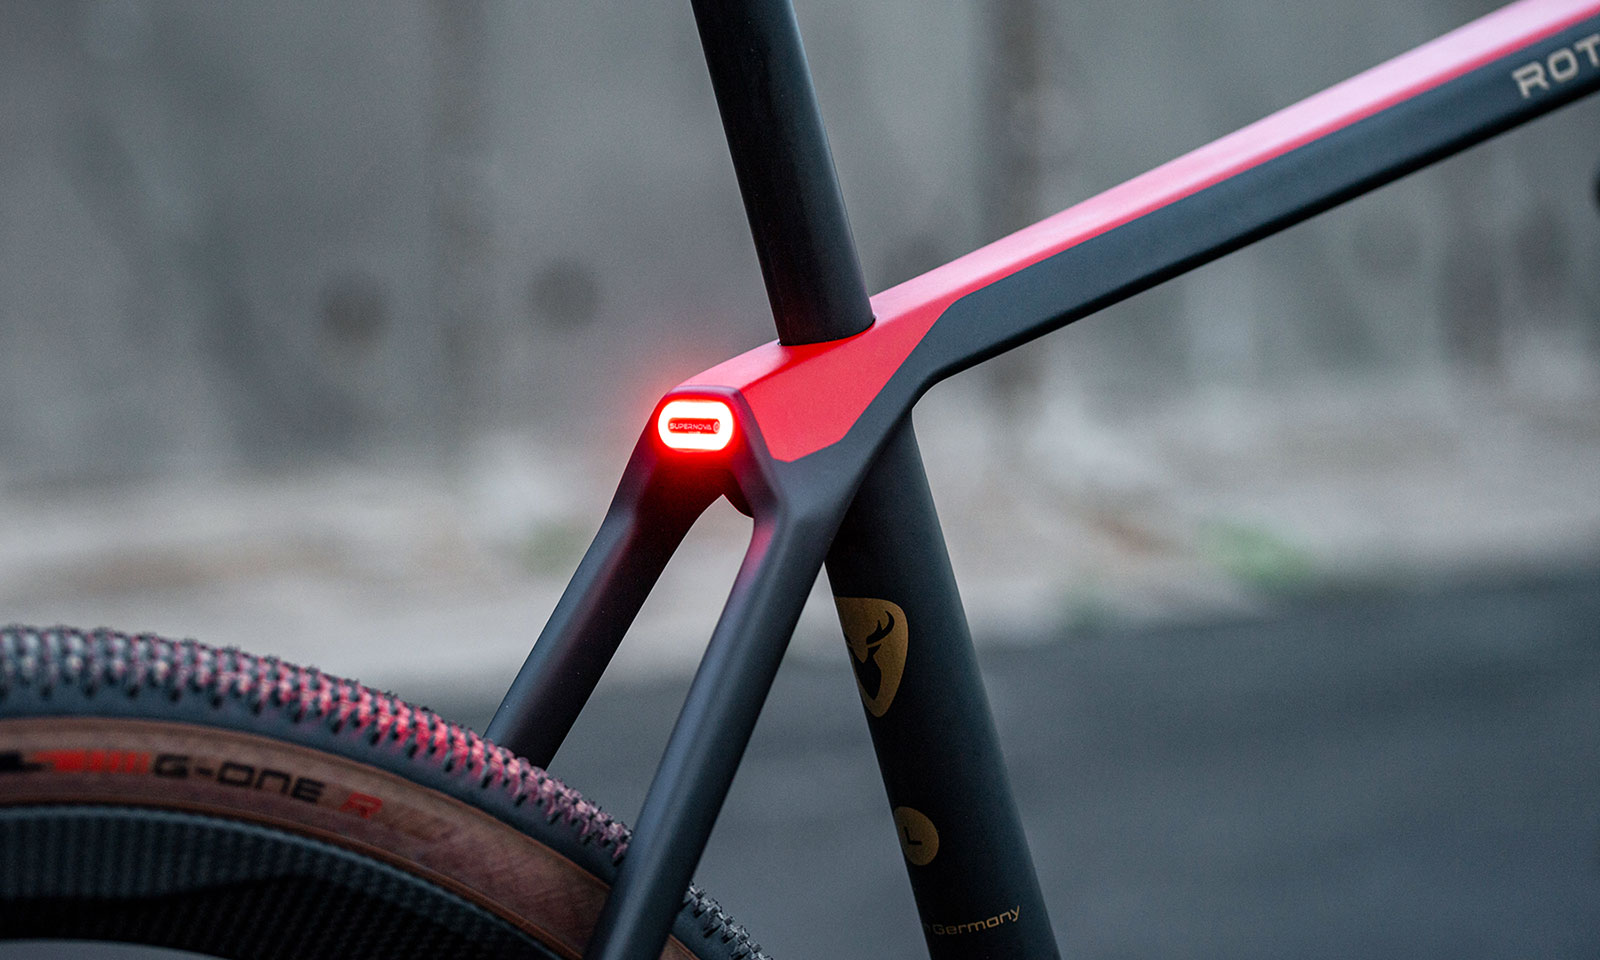 Rotwild R-R275 X gravel ebike, a lightweight TQ-powered fully integrated all-road e-bike, built-in taillight